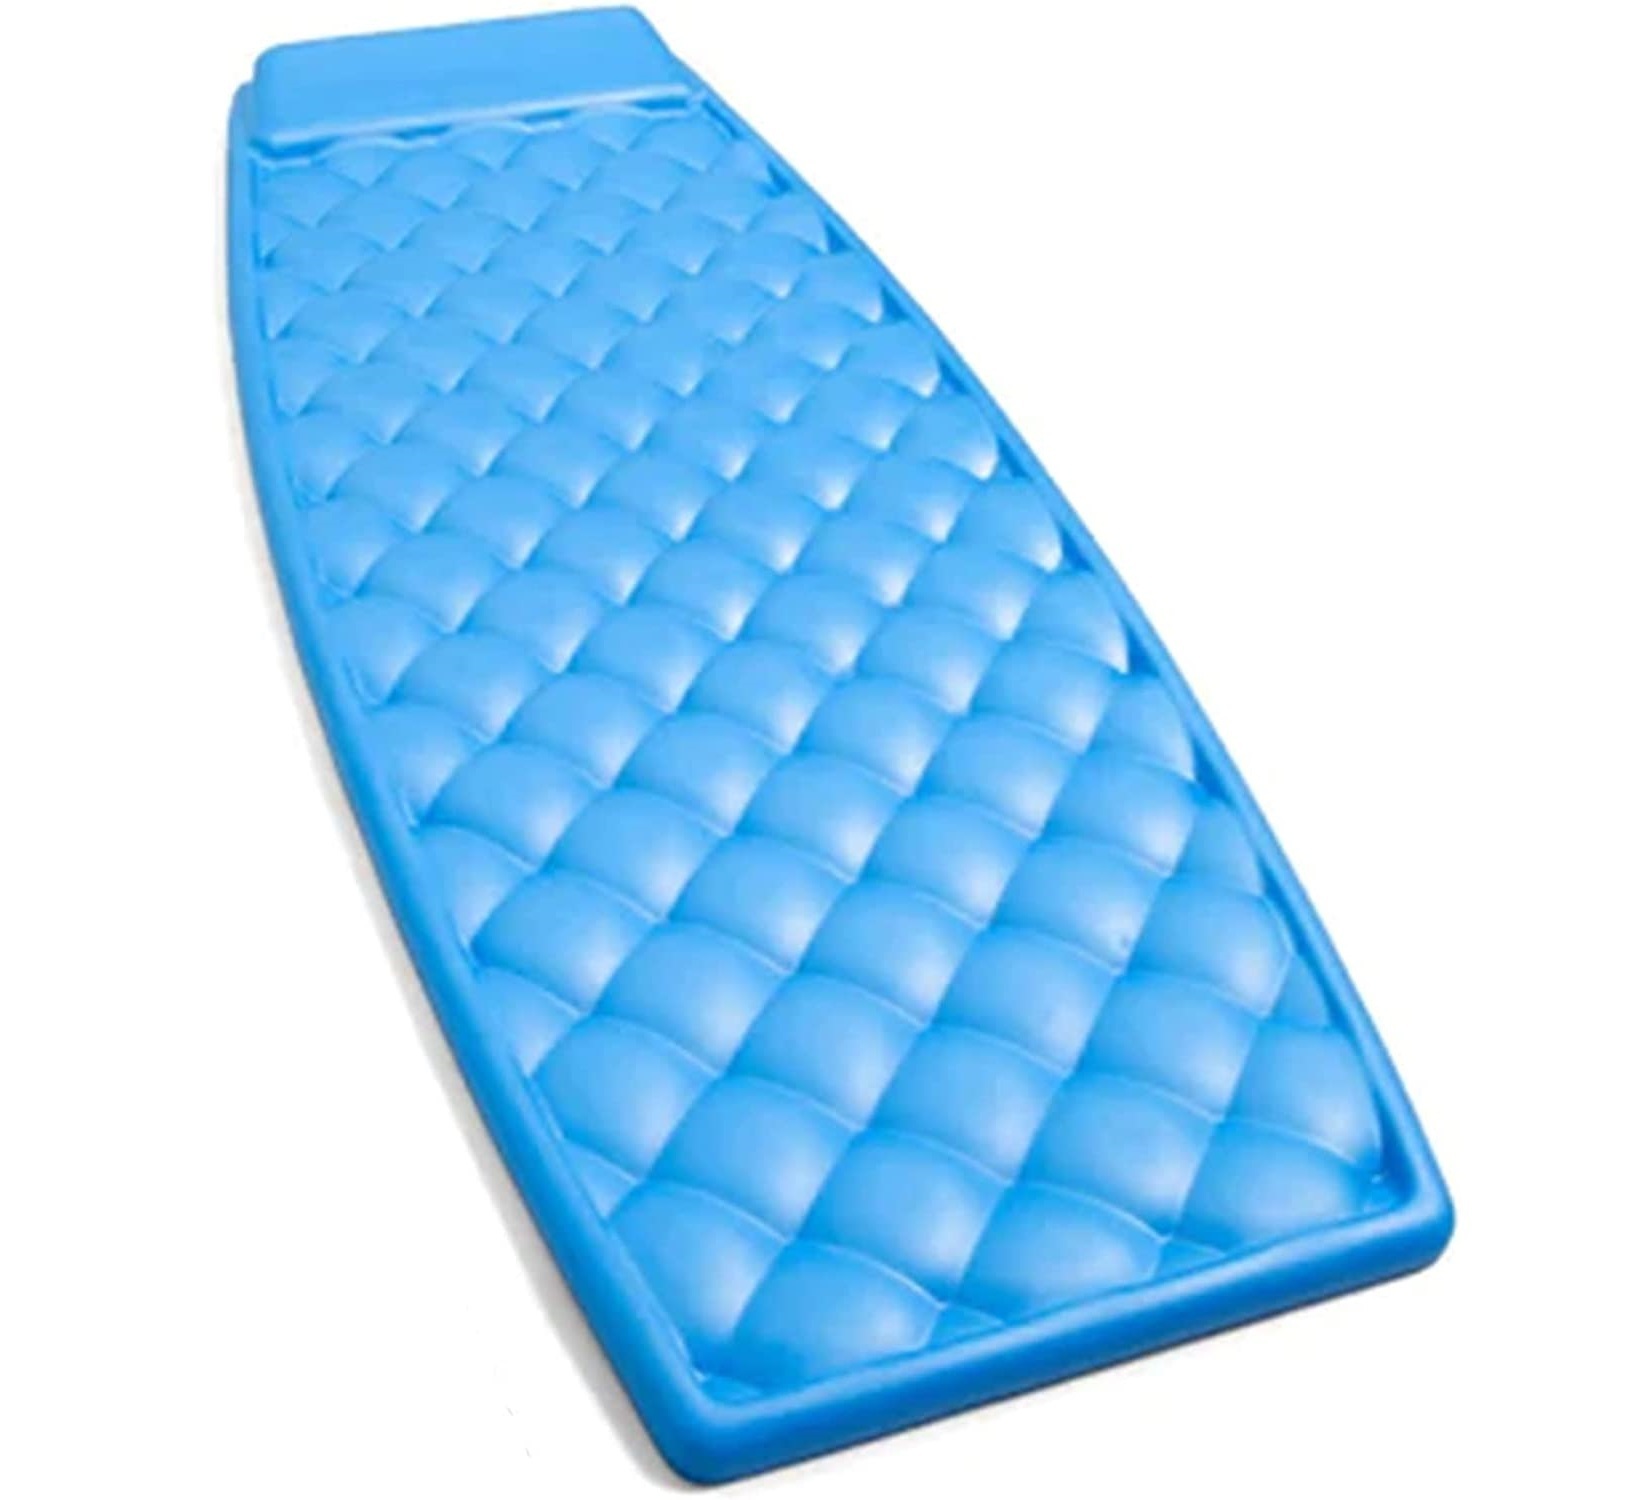 Quilted Foam Pool Lounger